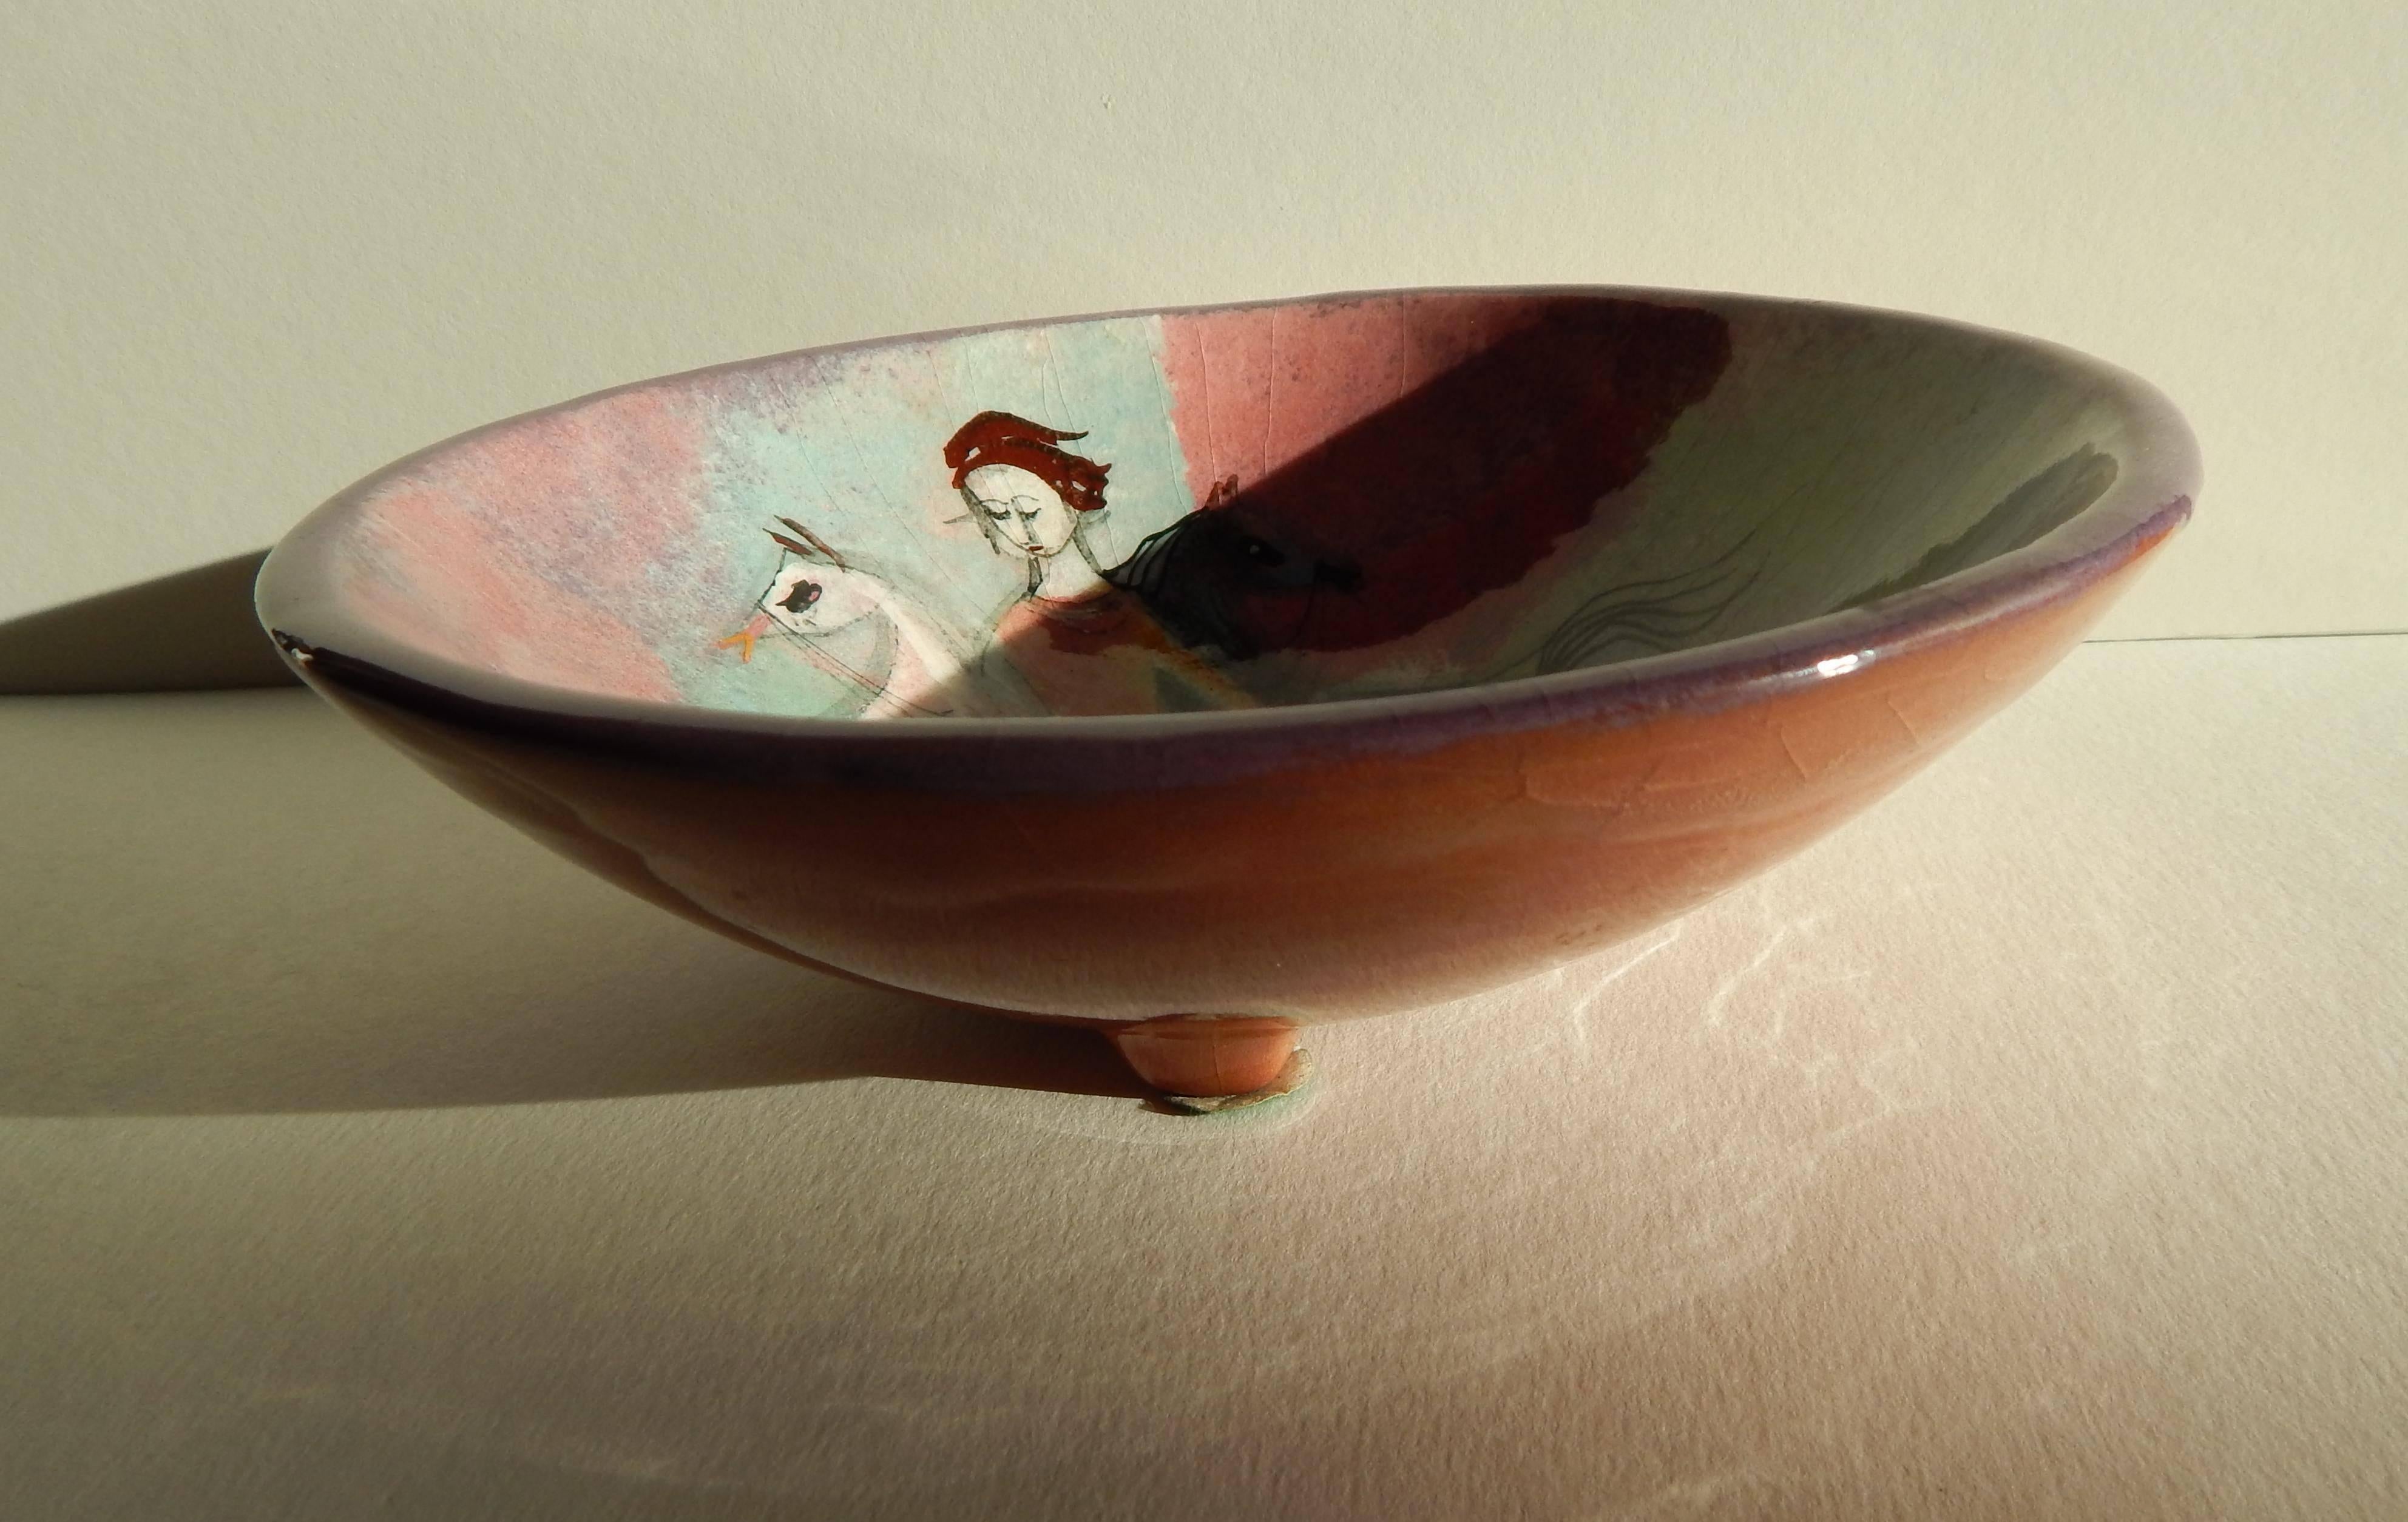 Pillin is known for her whimsical designs and a re-occurring motifs of women, birds, horses and flowers.
Decorated ceramic footed bowl by Polia Pillin (1909-1992).
Signed on the bottom: Pillin.
Perfect condition, no chips, cracks or